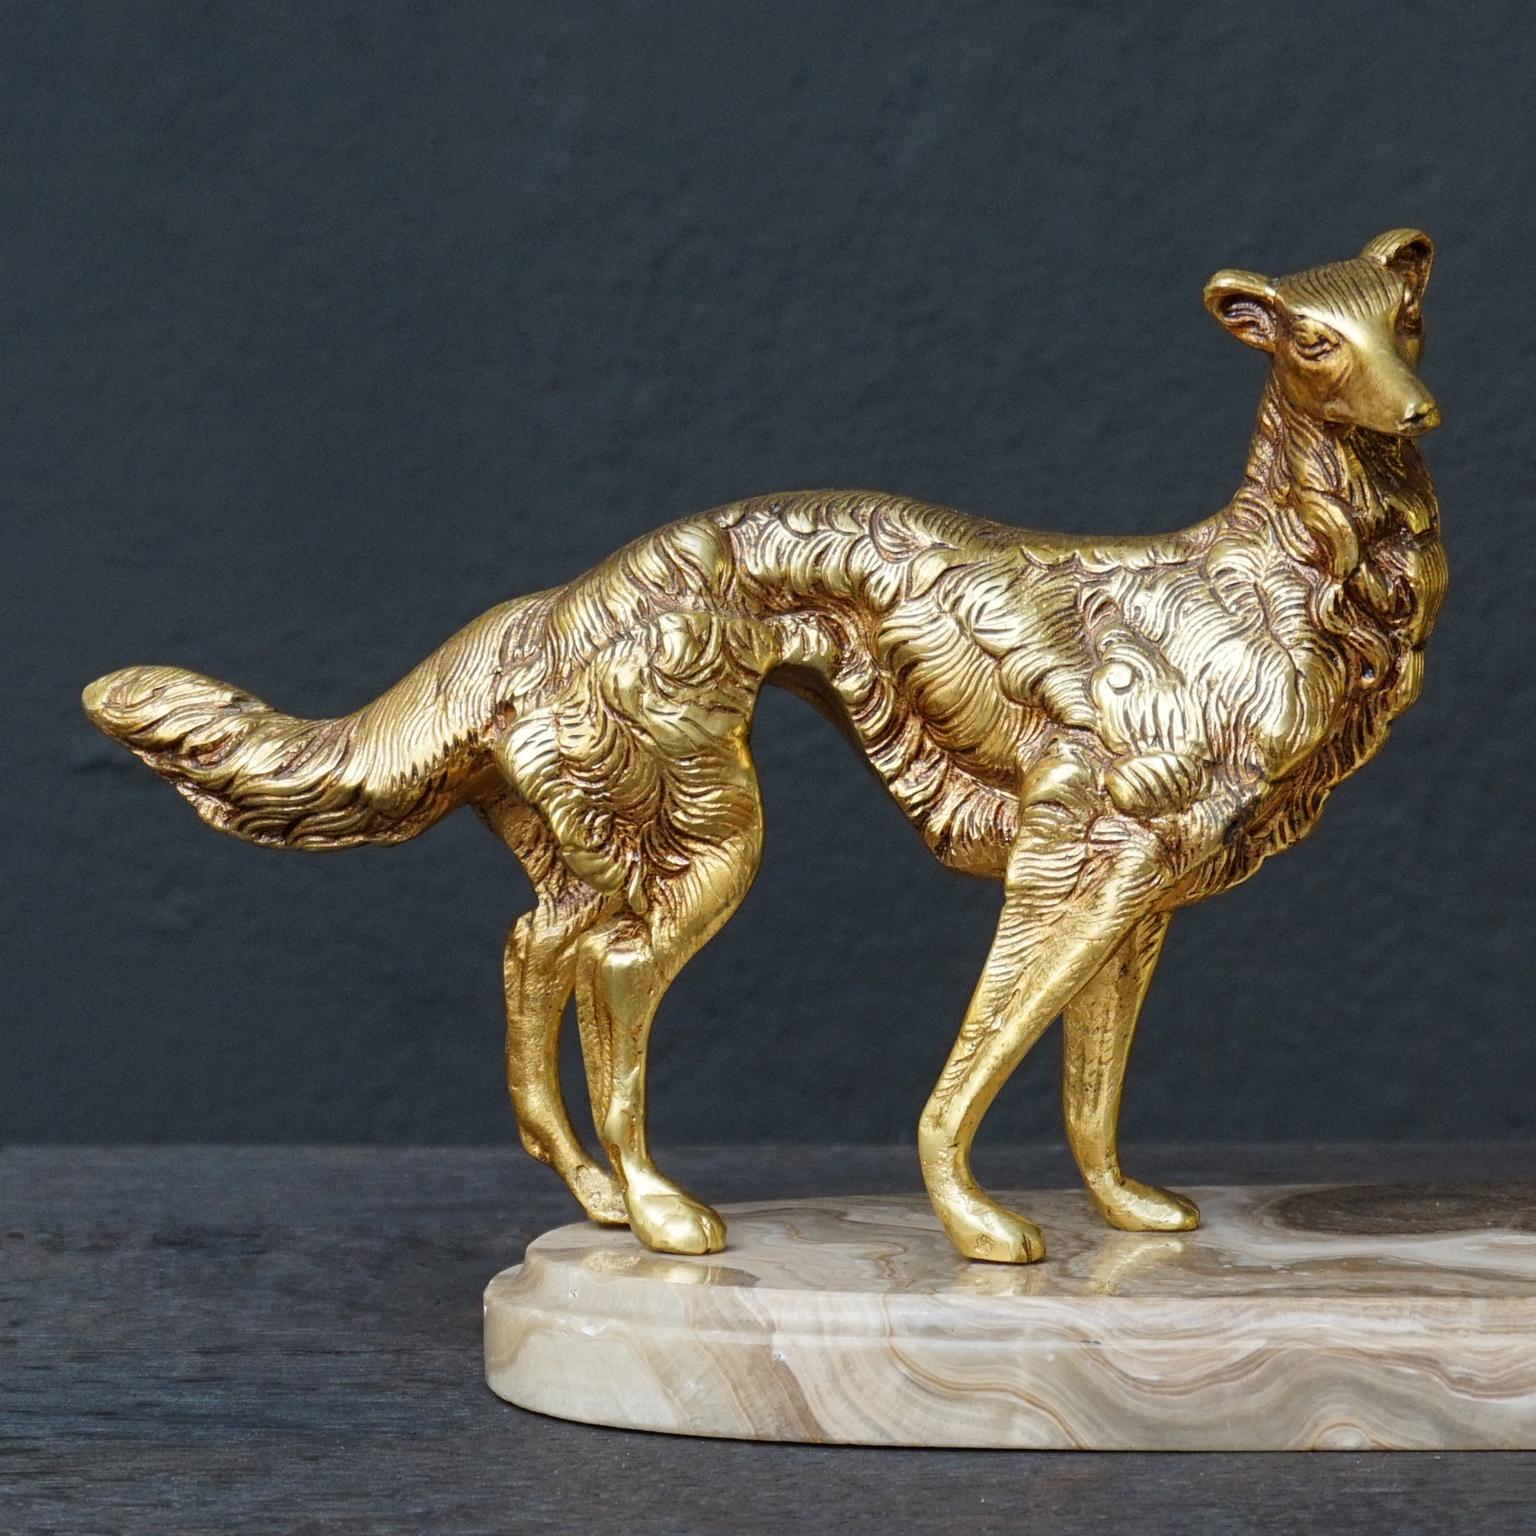 19th C. Art Deco French Brass Borzoi or Barzoi Dogs on 'Cafe au Lait' Marble 3